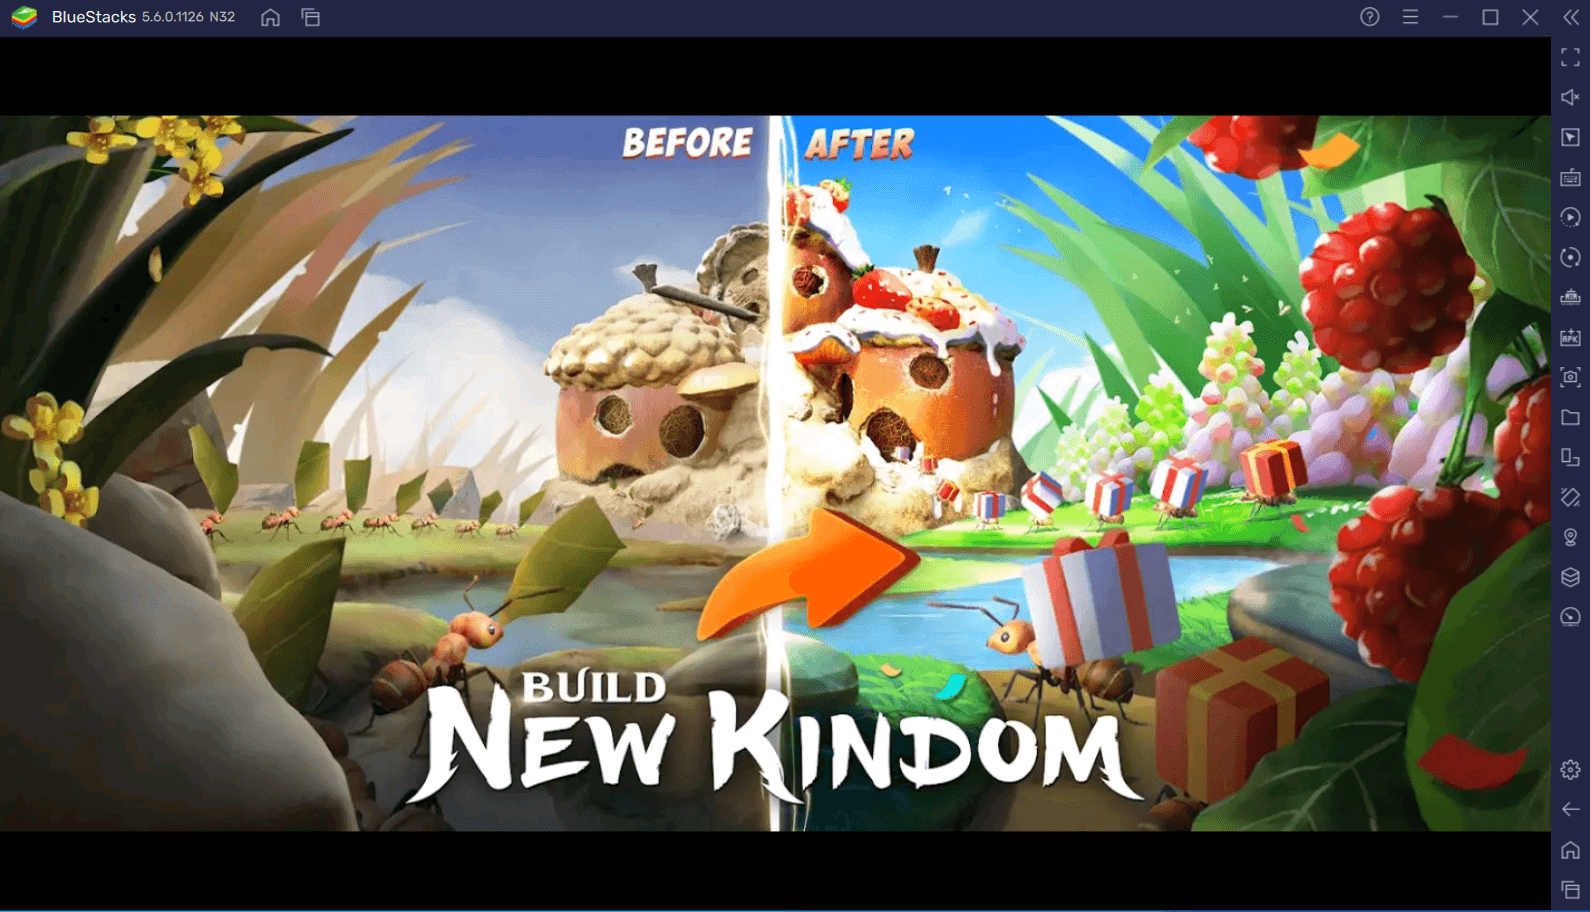 Expand your Kingdom in The Ants: Underground Kingdom with this Redeem Code